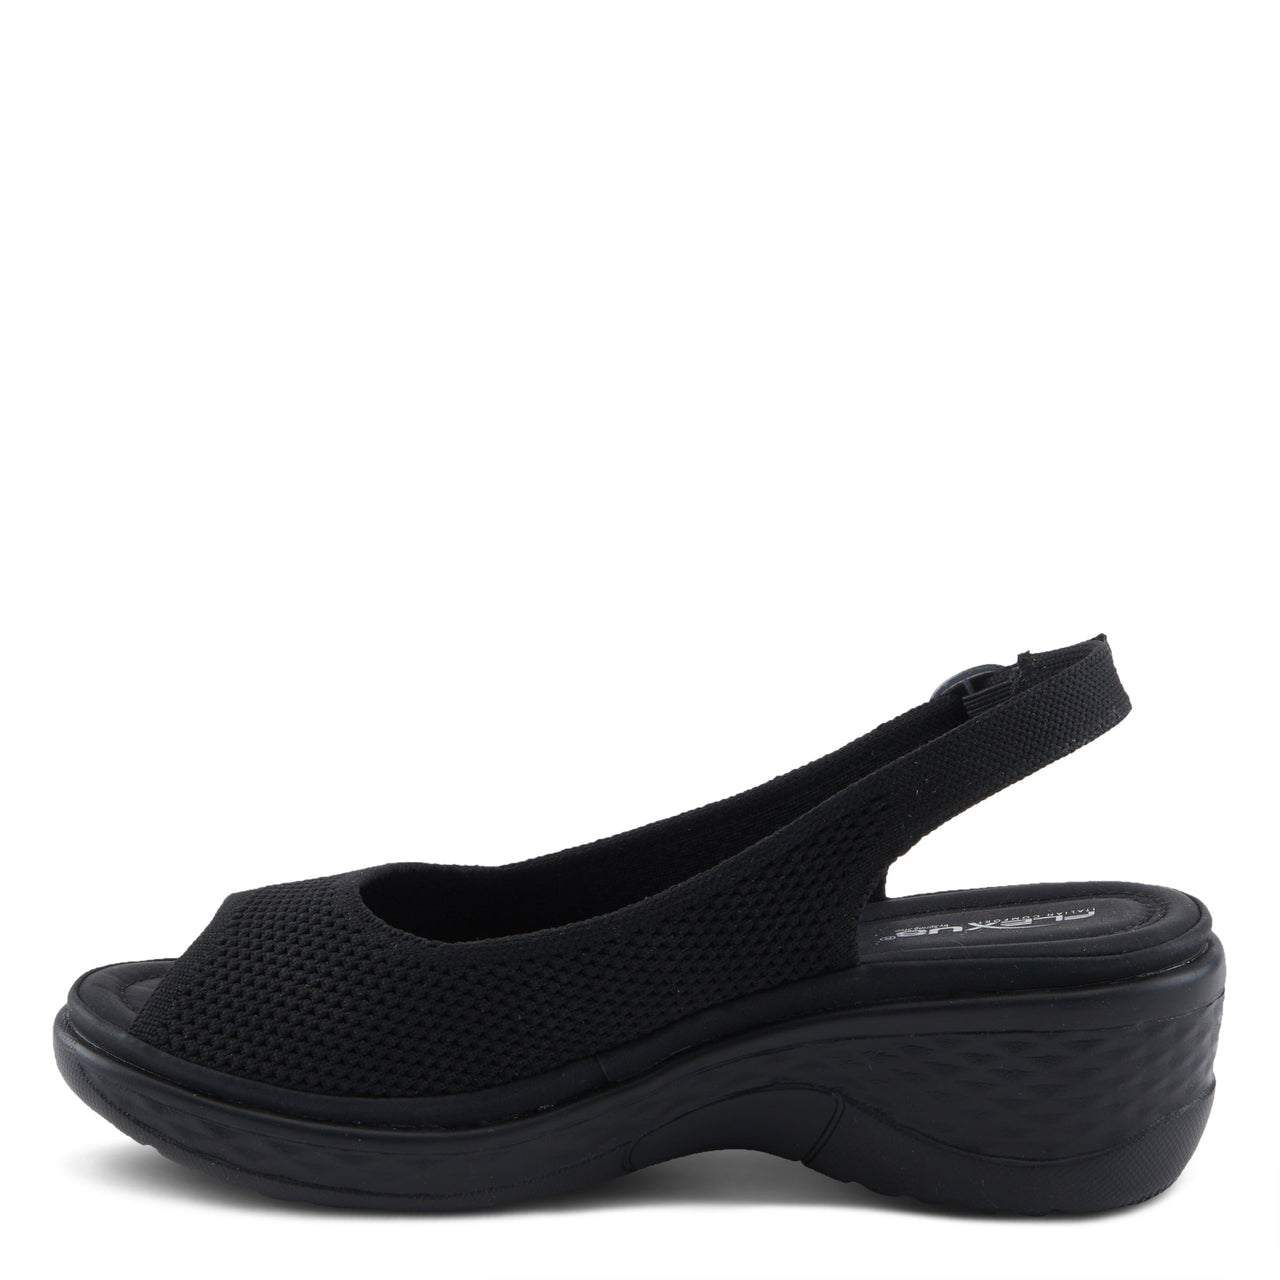 Women's Spring Step Shoes Flexus Mayberry Sandals in black, featuring adjustable straps and comfortable cushioned footbed